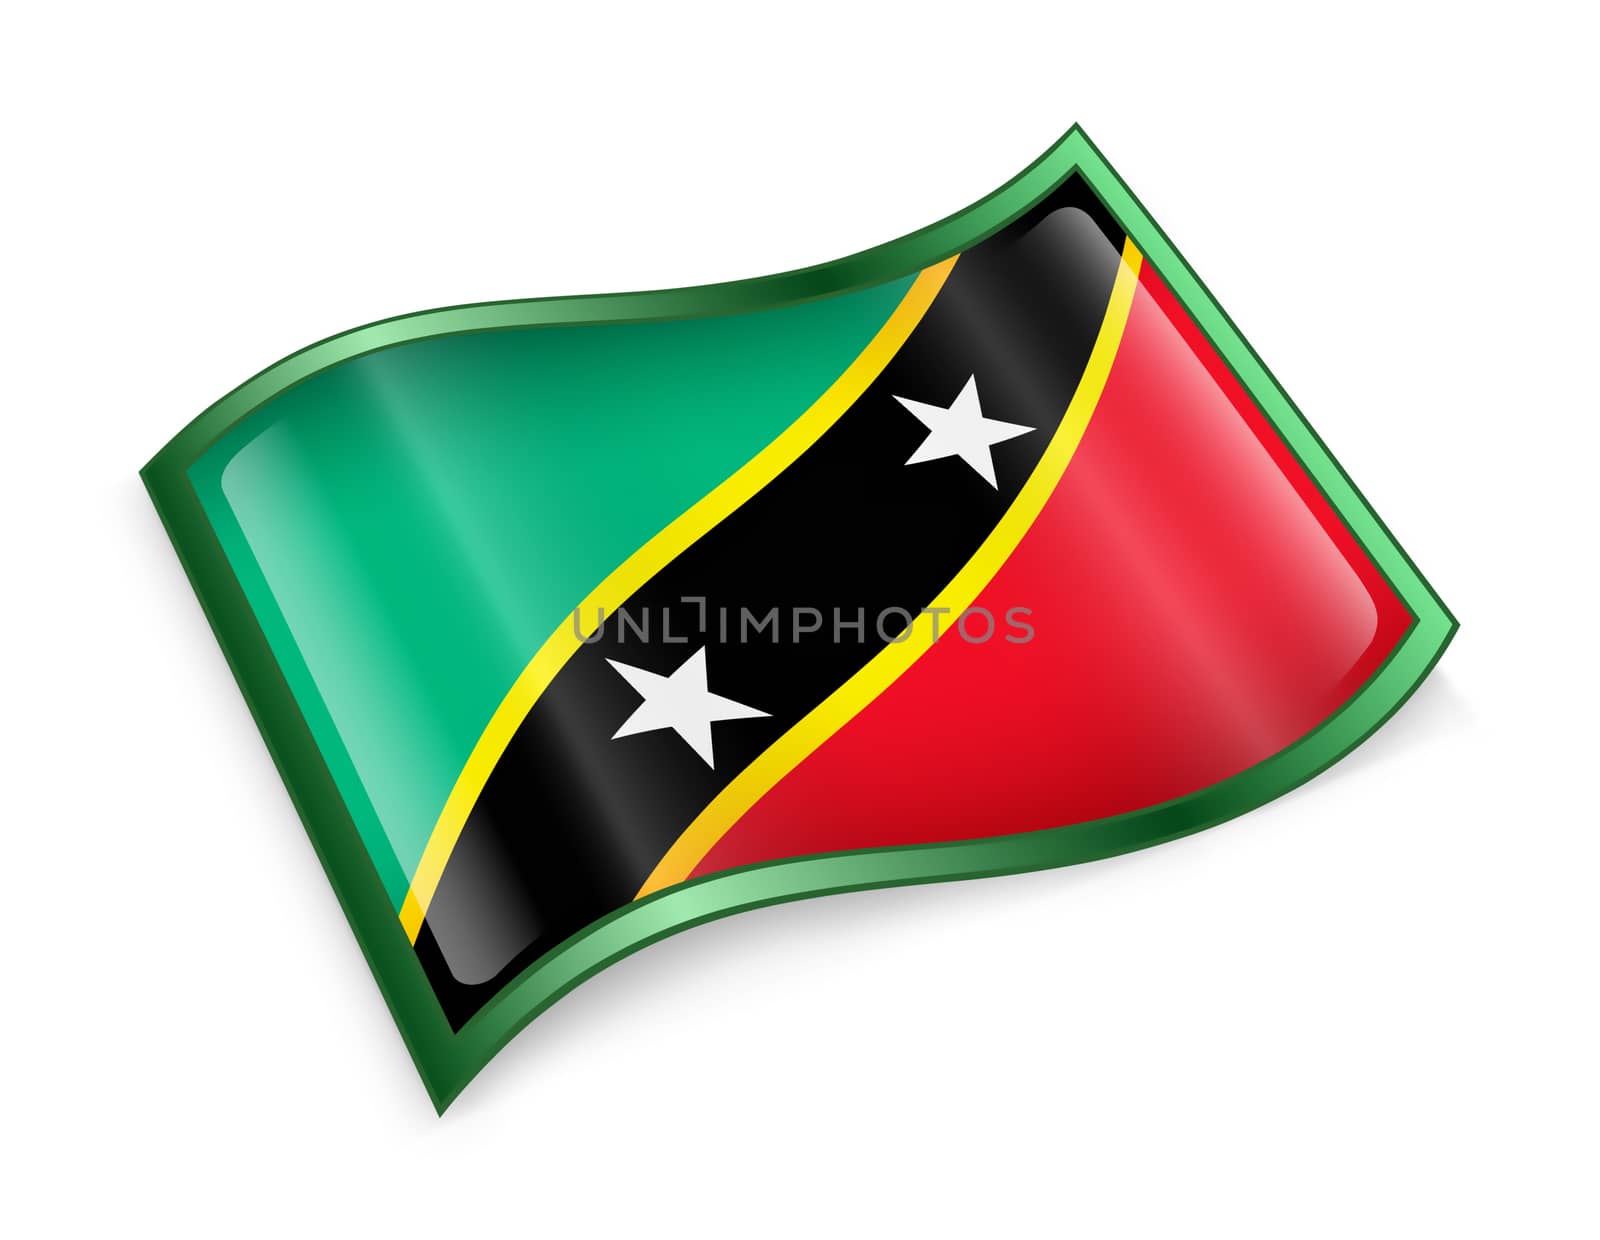 Saint Kitts and Nevis Flag icon, isolated on white background.